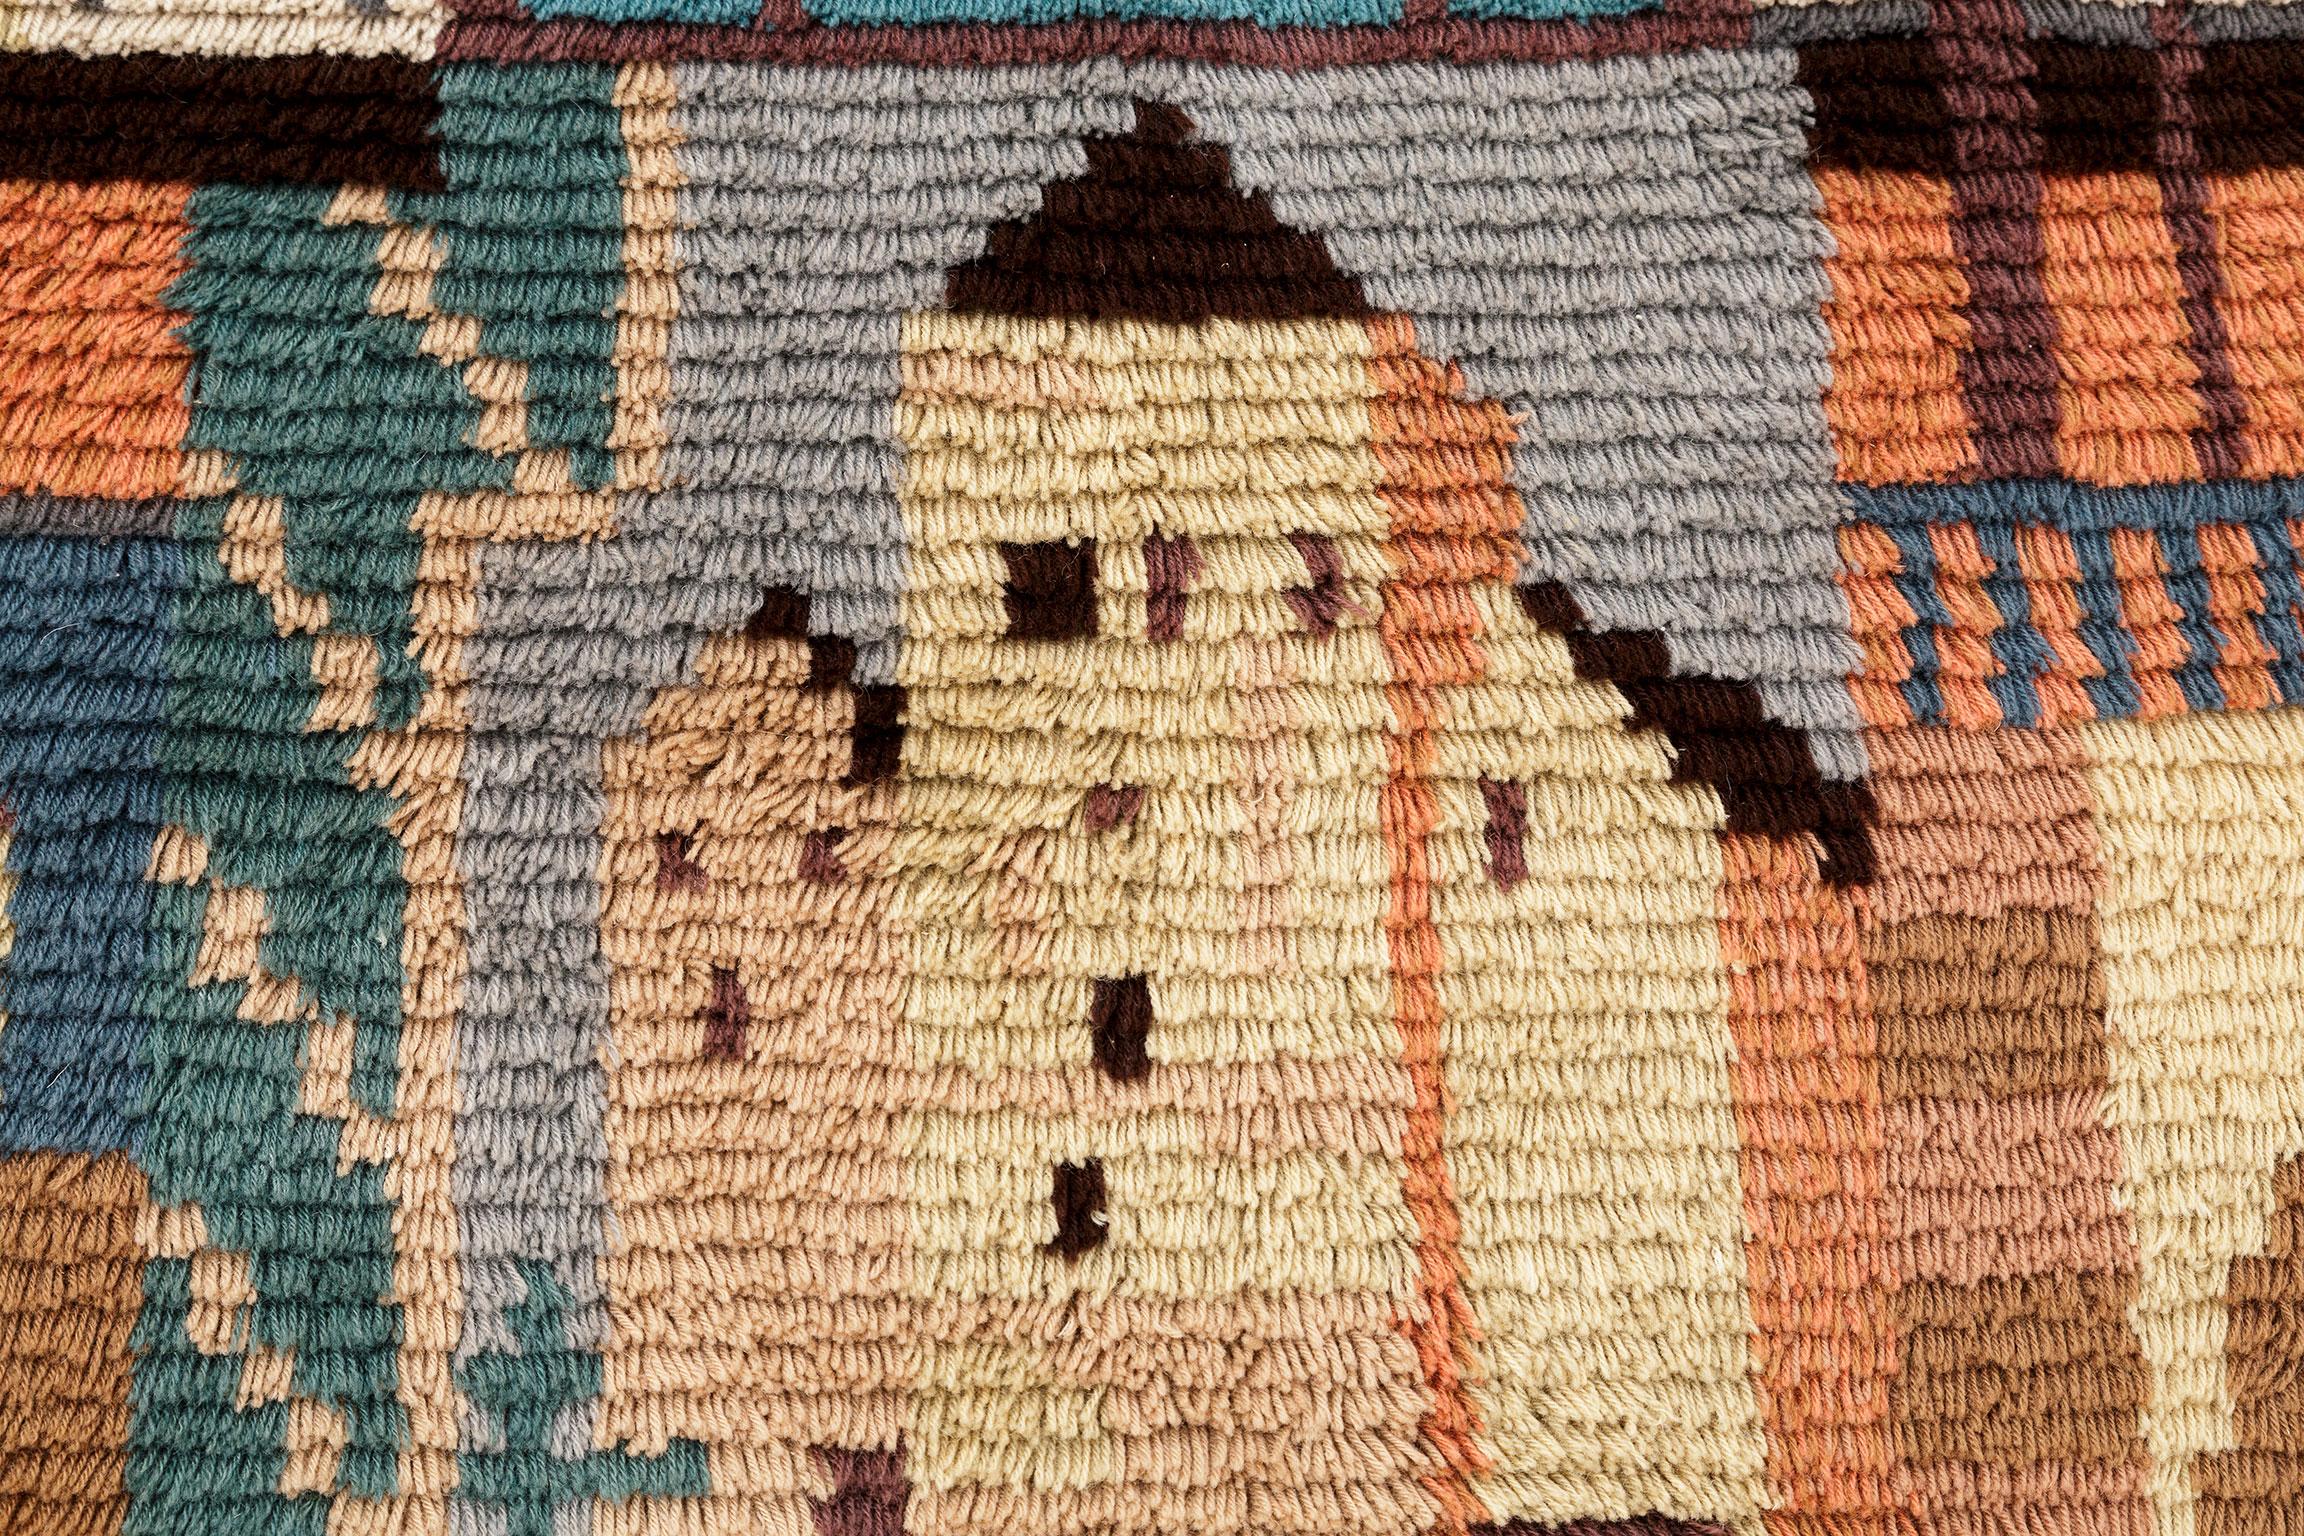 Rya rug (Finnish ‘ryijy’) from an unknown weaver depicting buildings from the city of Turku. The year of manufacture 1939 and the weaver's initials TJ located in the uppermost part of the item, text Aboa Vetus Et Nova (Turku Old And New) at the